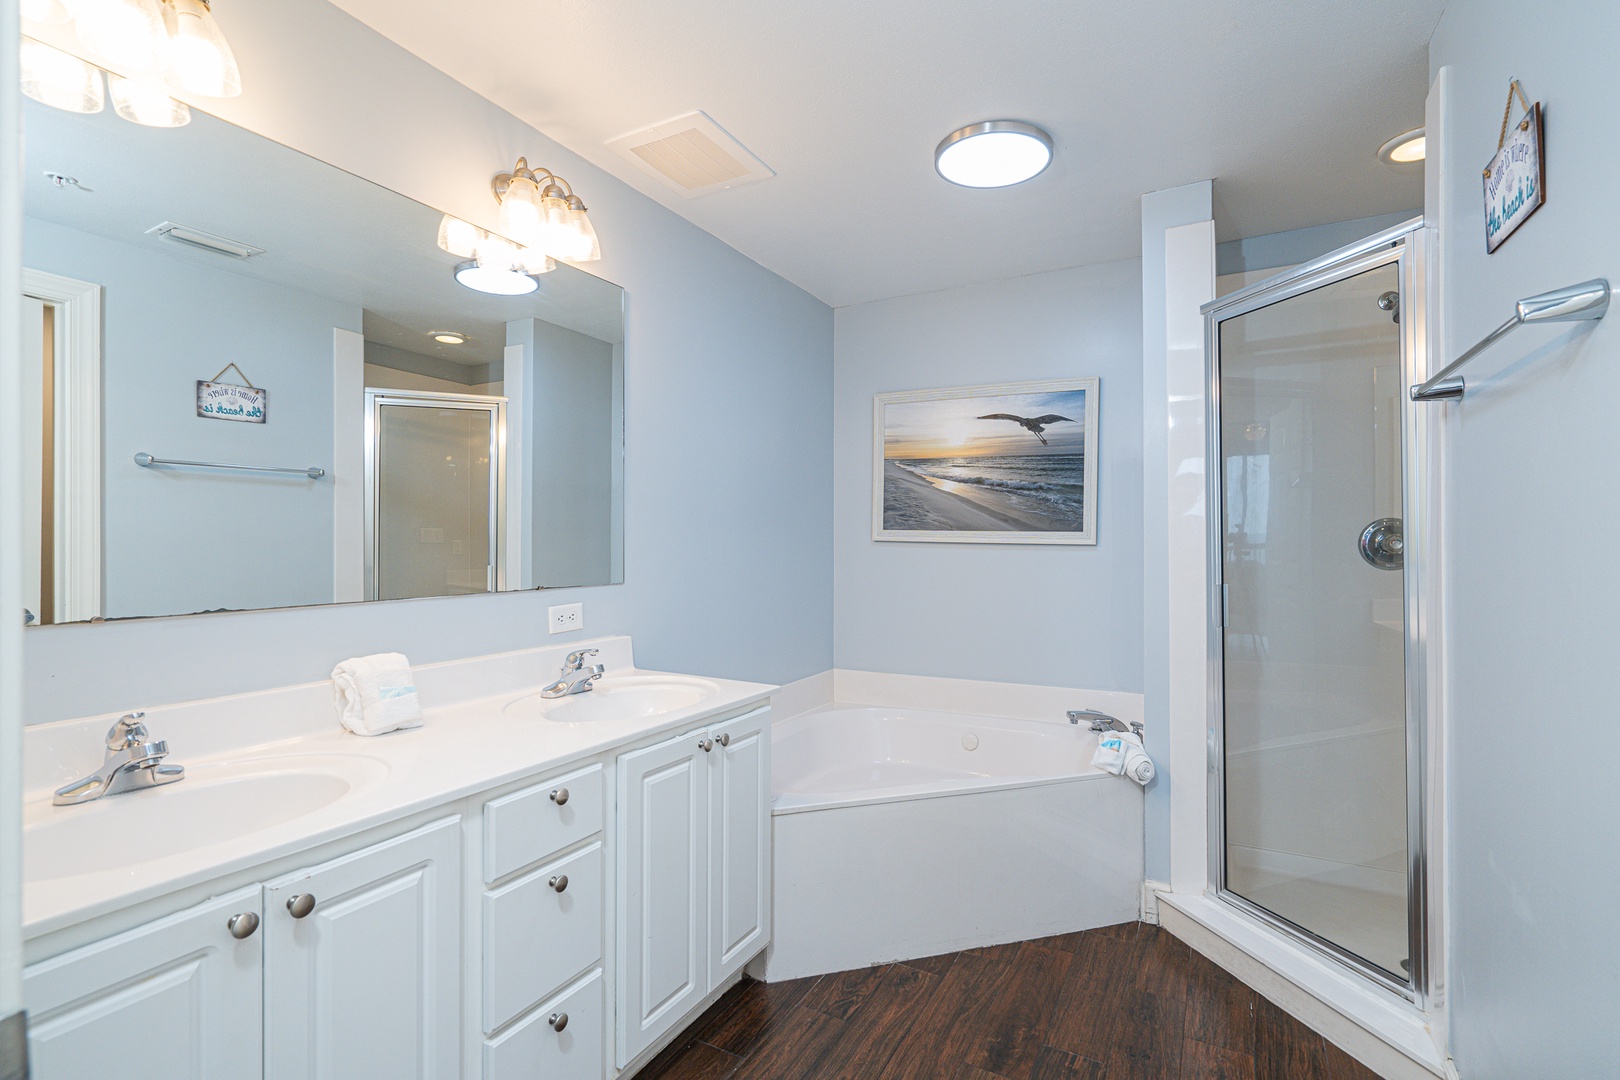 The master ensuite showcases a double vanity, soaking tub, & glass shower